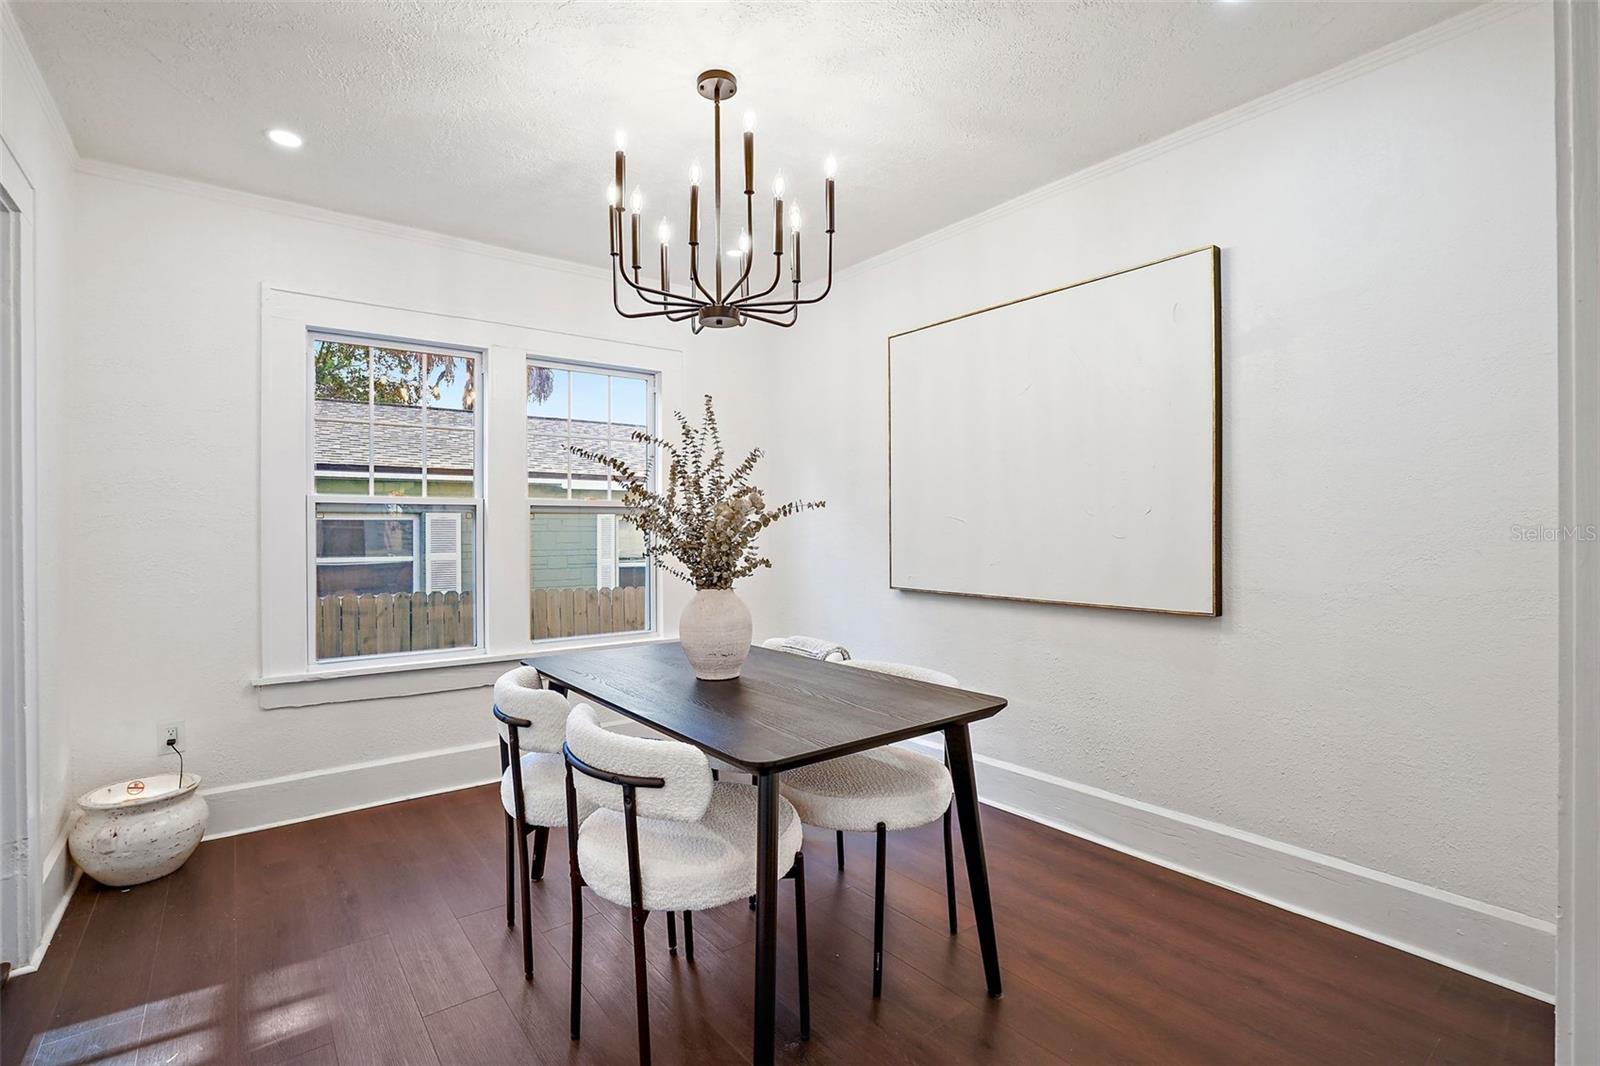 Dining room features original 1920's casework and chandelier inspired by that time era